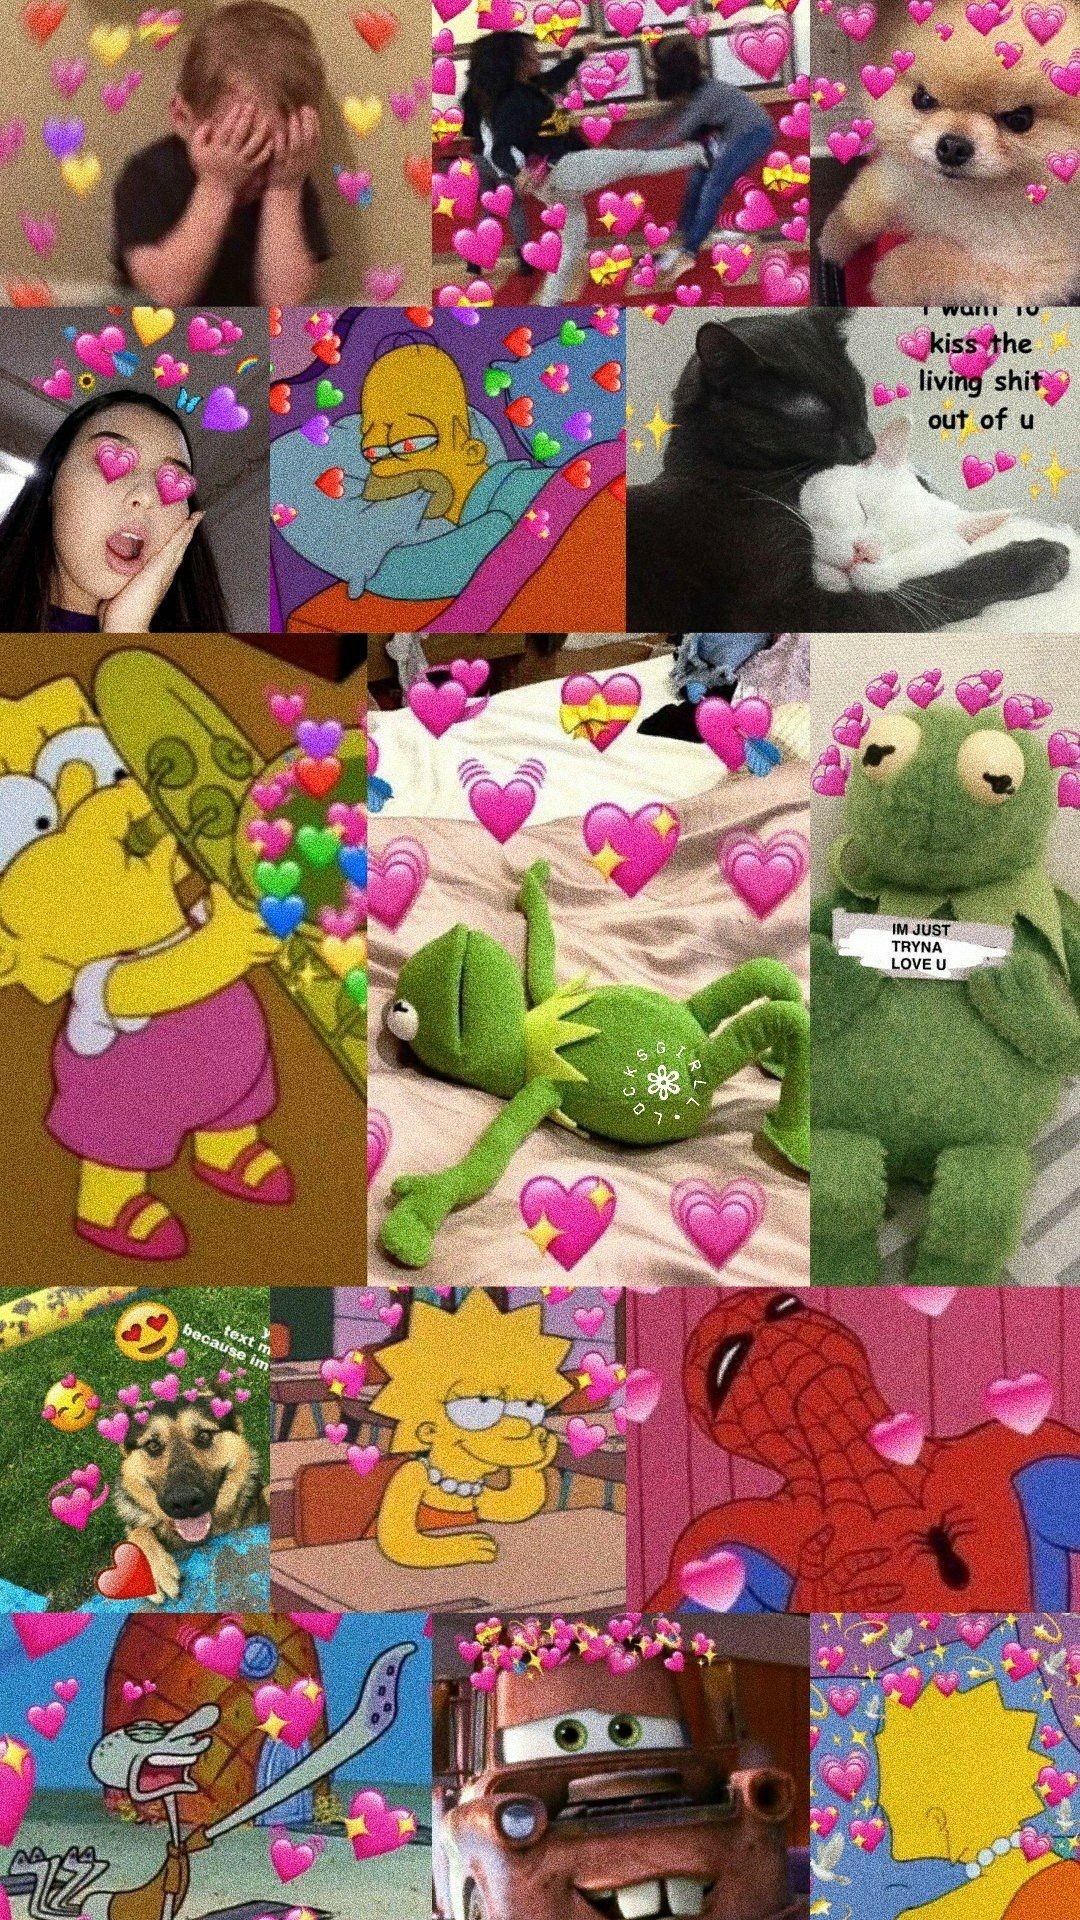 A collage of pictures with hearts and cartoon characters - Lisa Simpson, Kermit the Frog